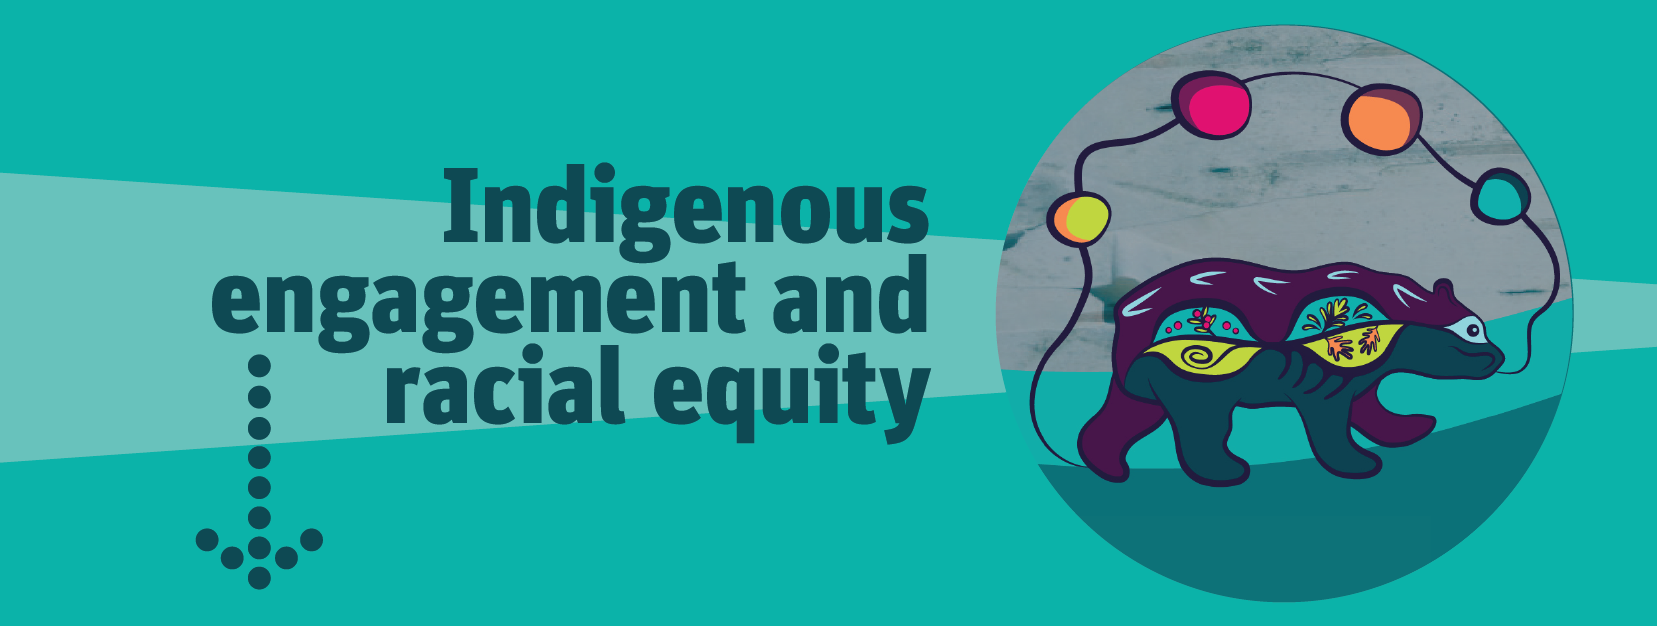 Indigenous engagement and racial equity